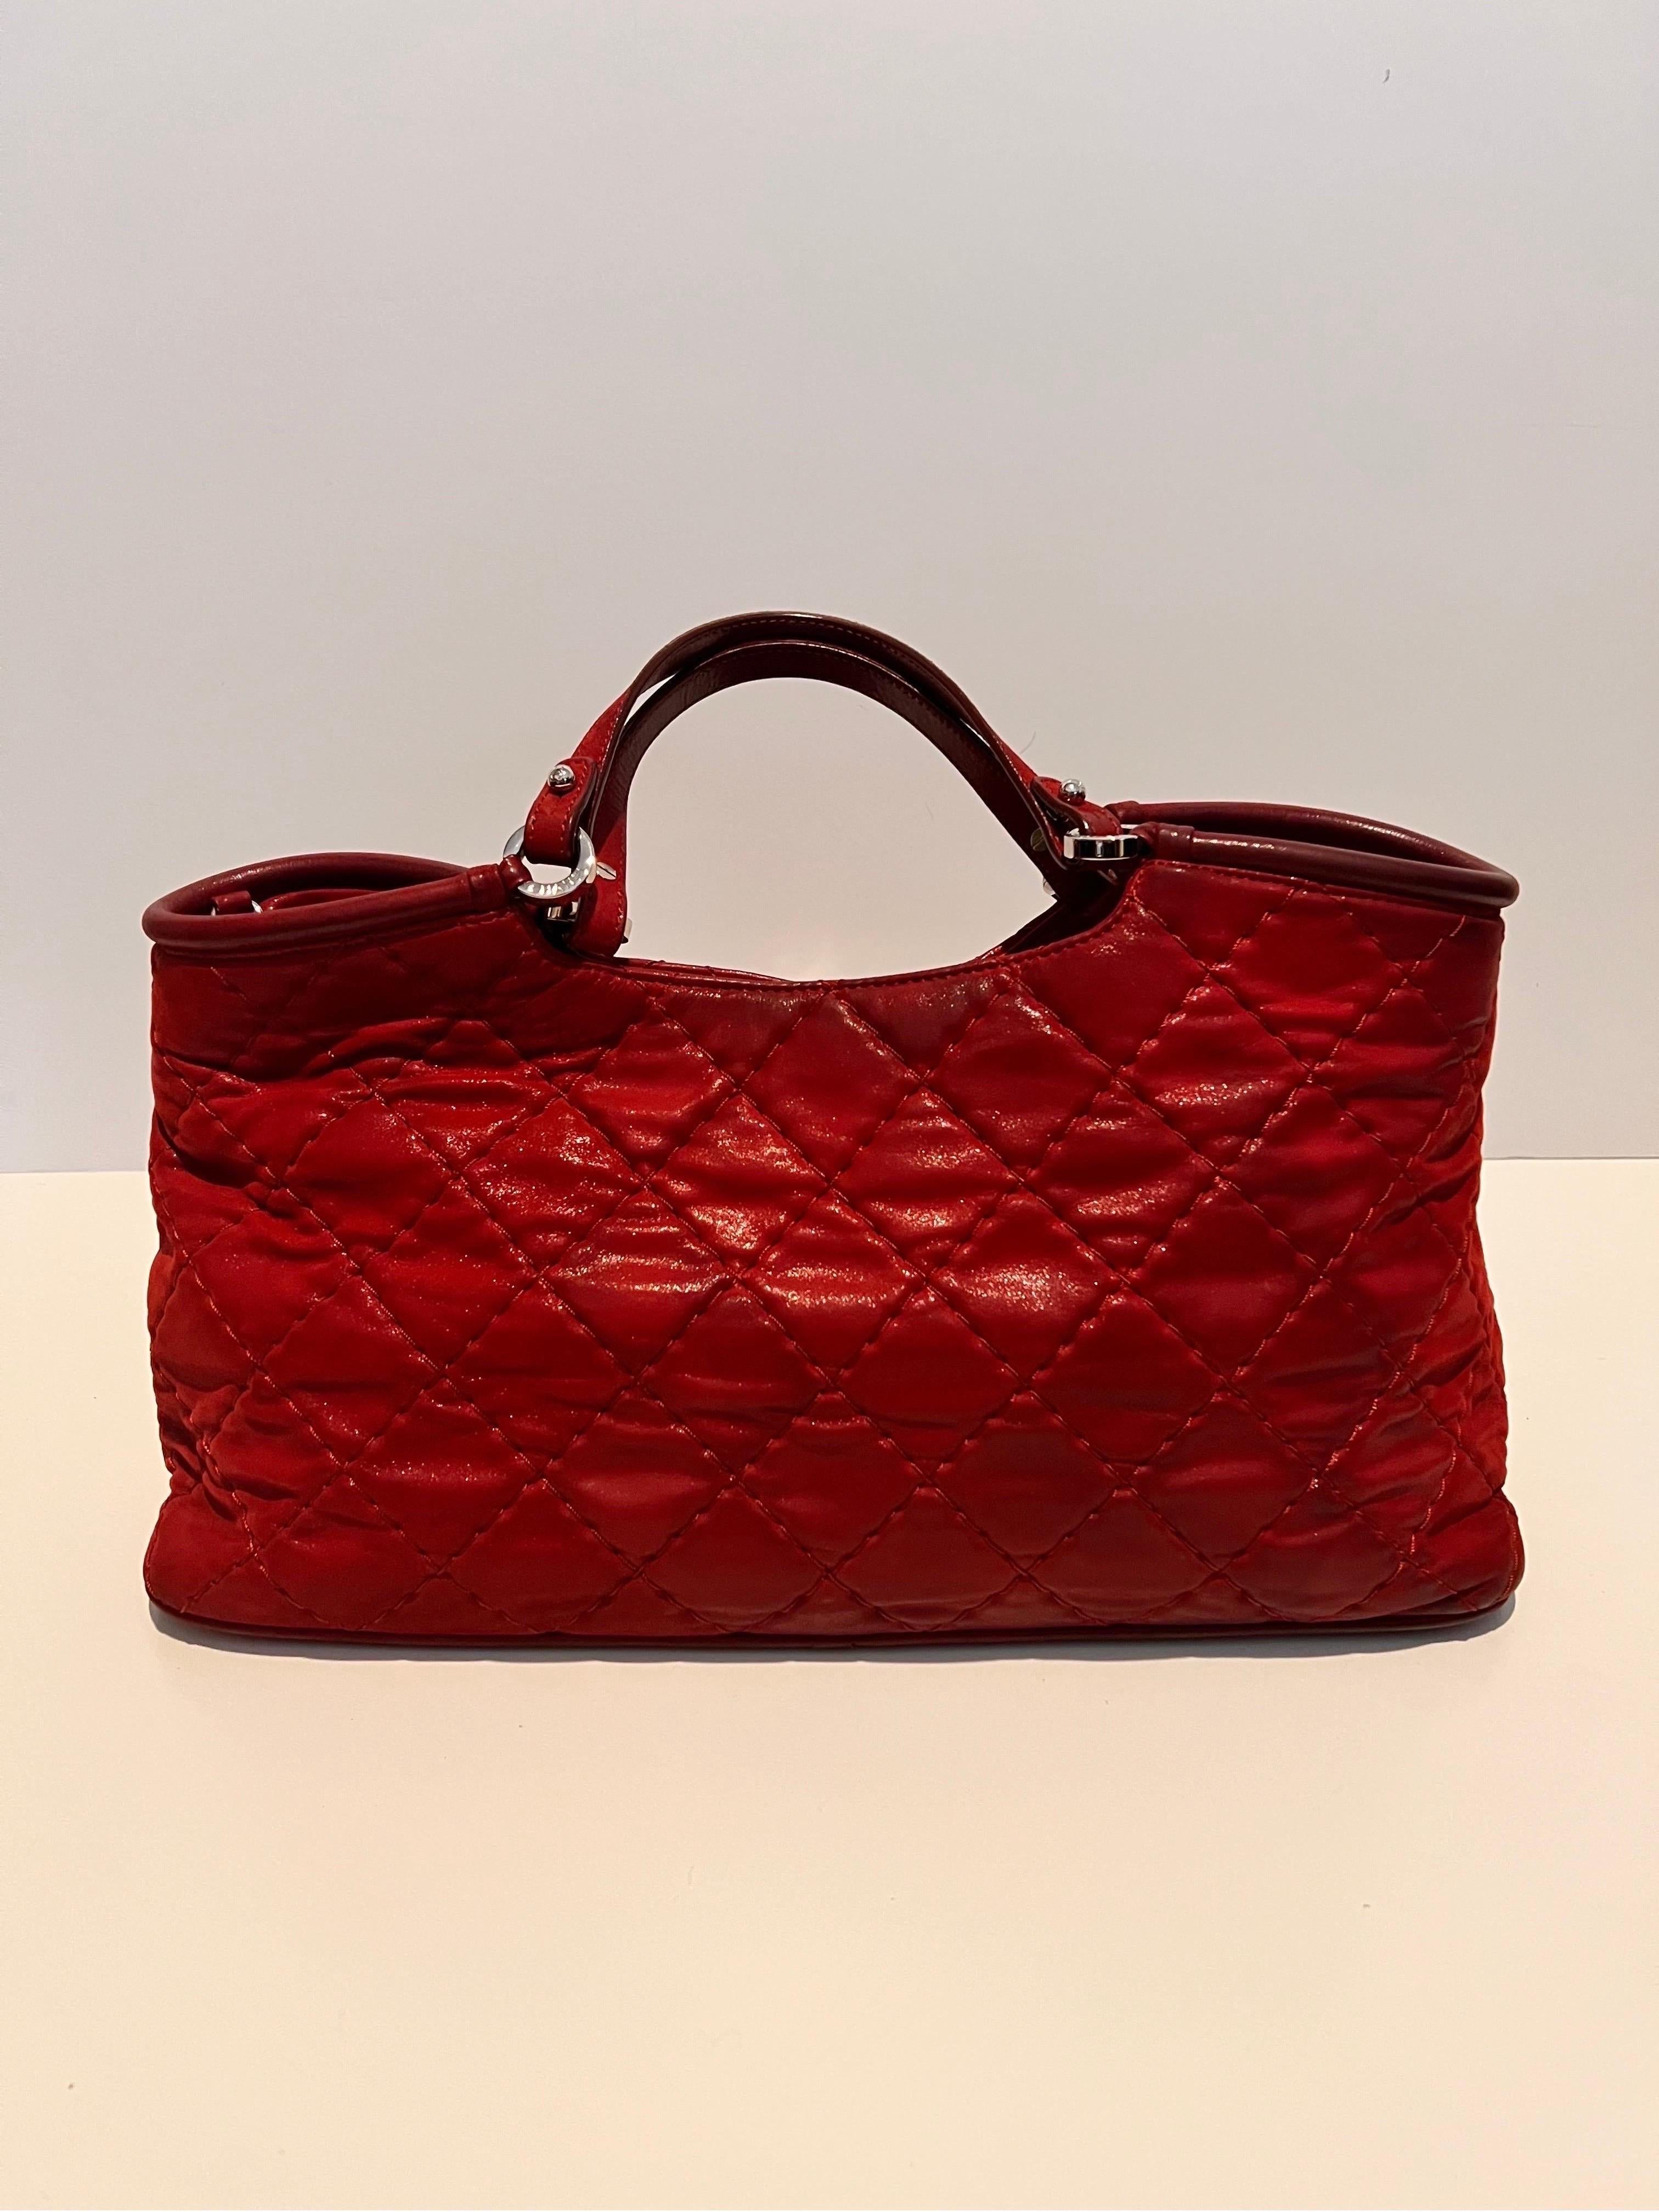 Chanel quilted handbag in red 4